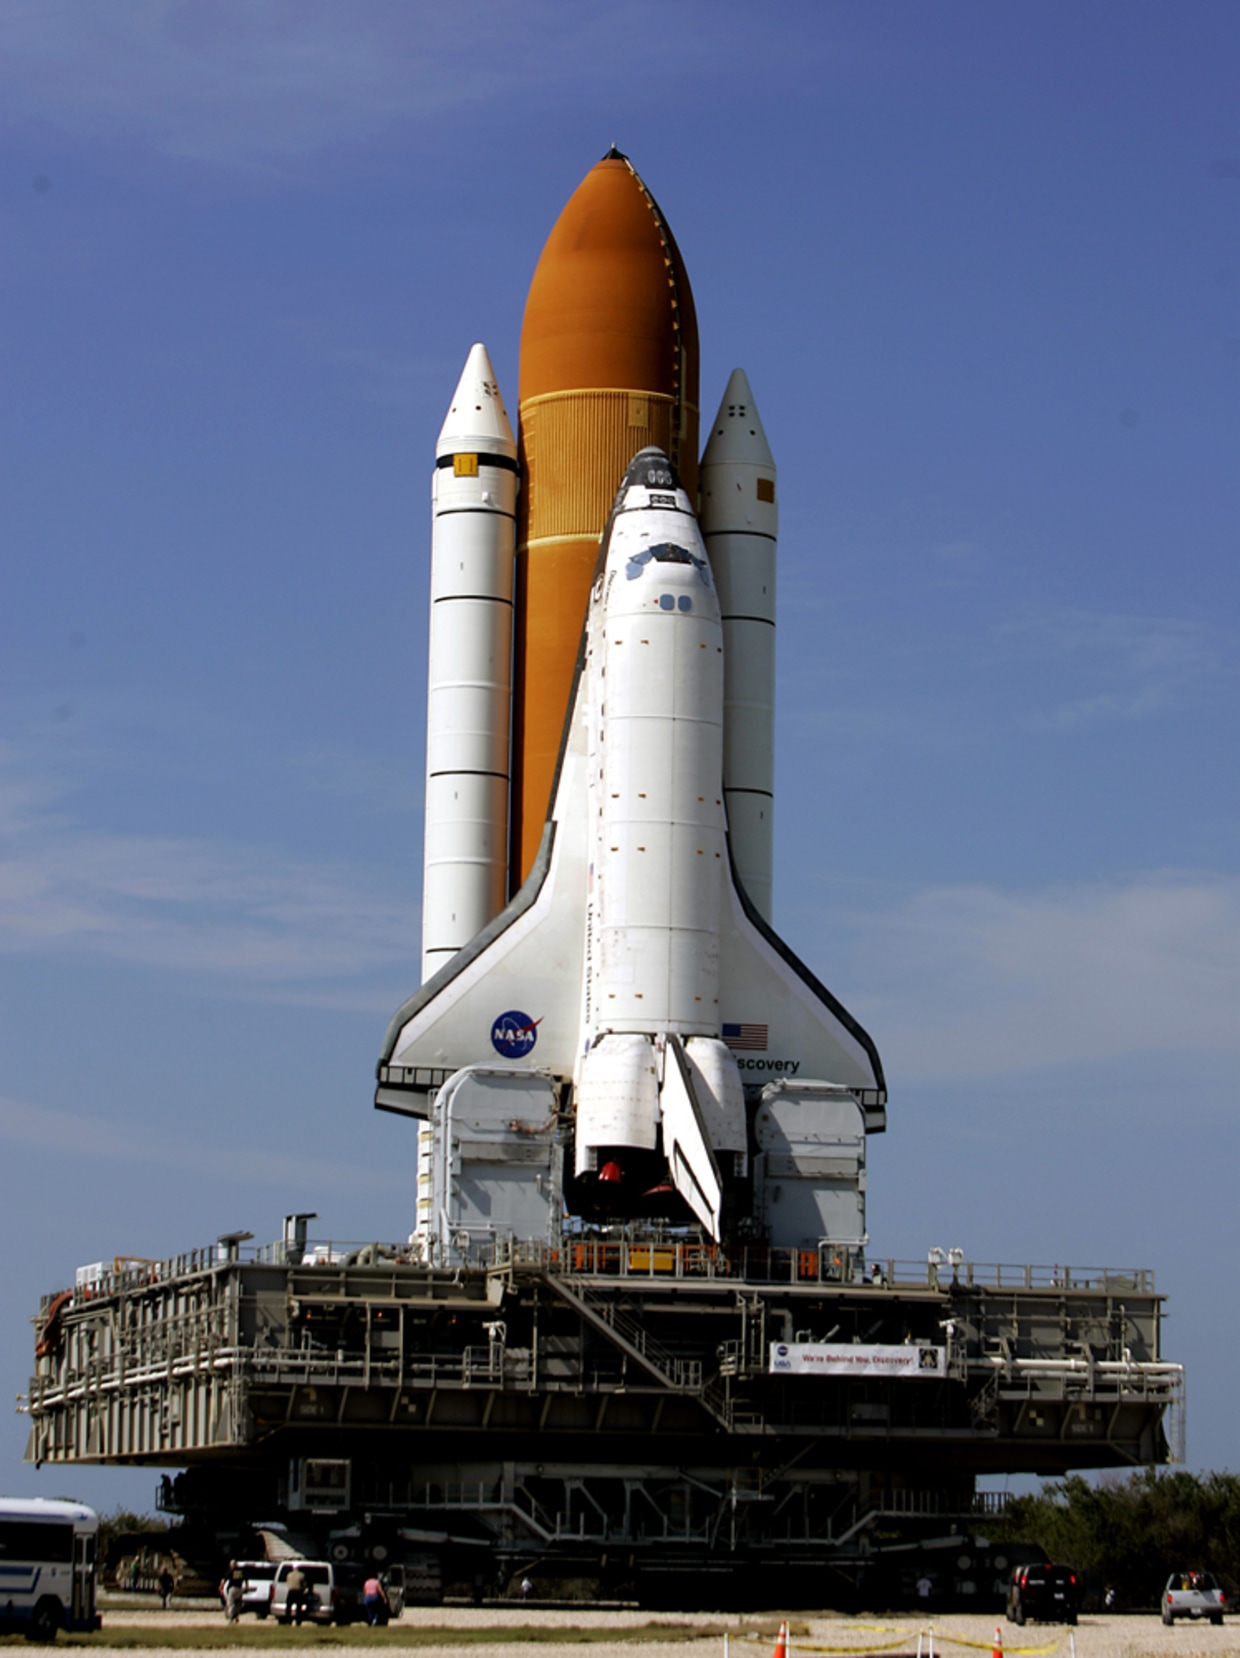 Space shuttle rolls out to launch pad